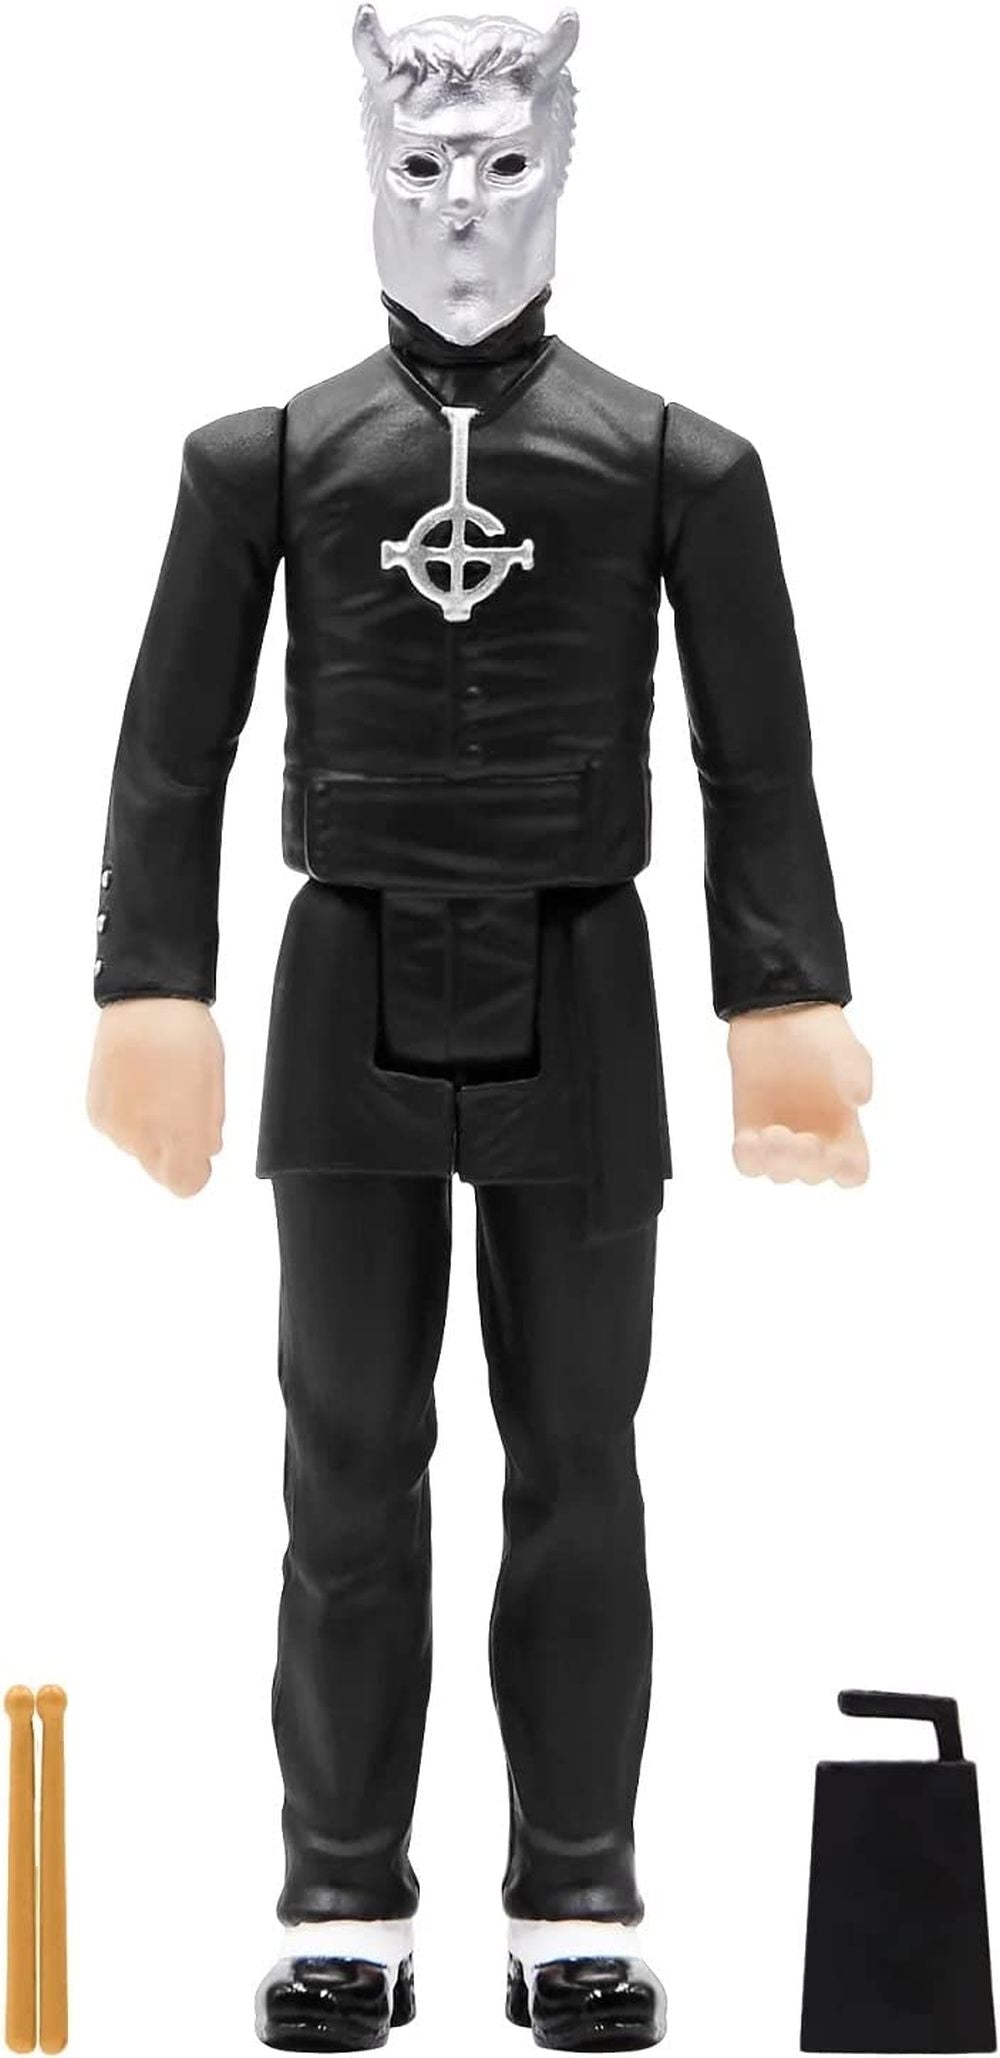 Ghost - Meliora Nameless Ghoul II 3.75 inch Super7 ReAction Figure